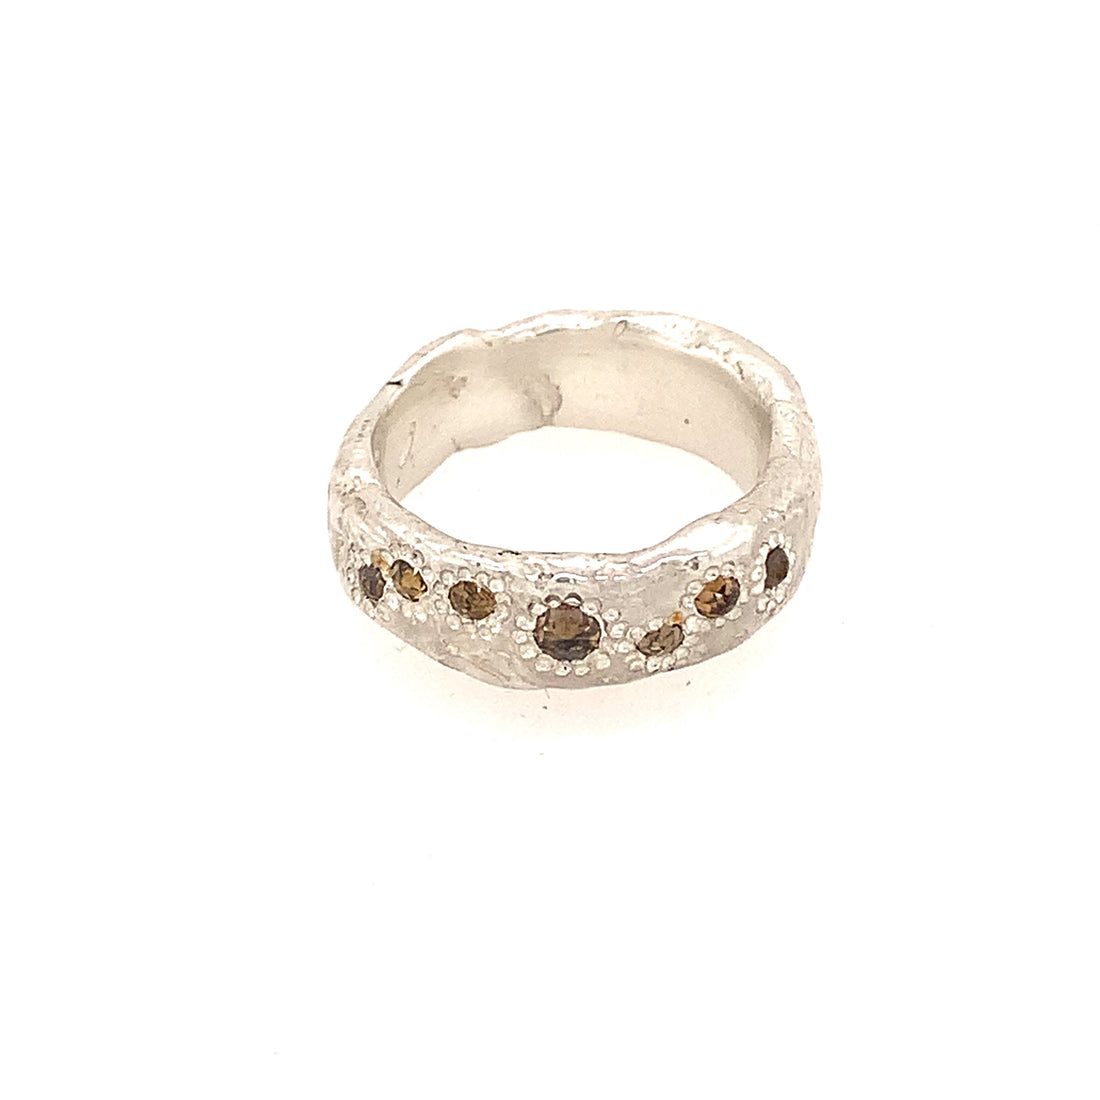 Designed with the essence of wabi-sabi, each ring is handcrafted using only the finest metals and cognac diamonds. It's the perfect ring to mark a special occasion or celebrate a personal milestone. So why wait?  Go ahead and make a statement and thrive in every aspect of your life!